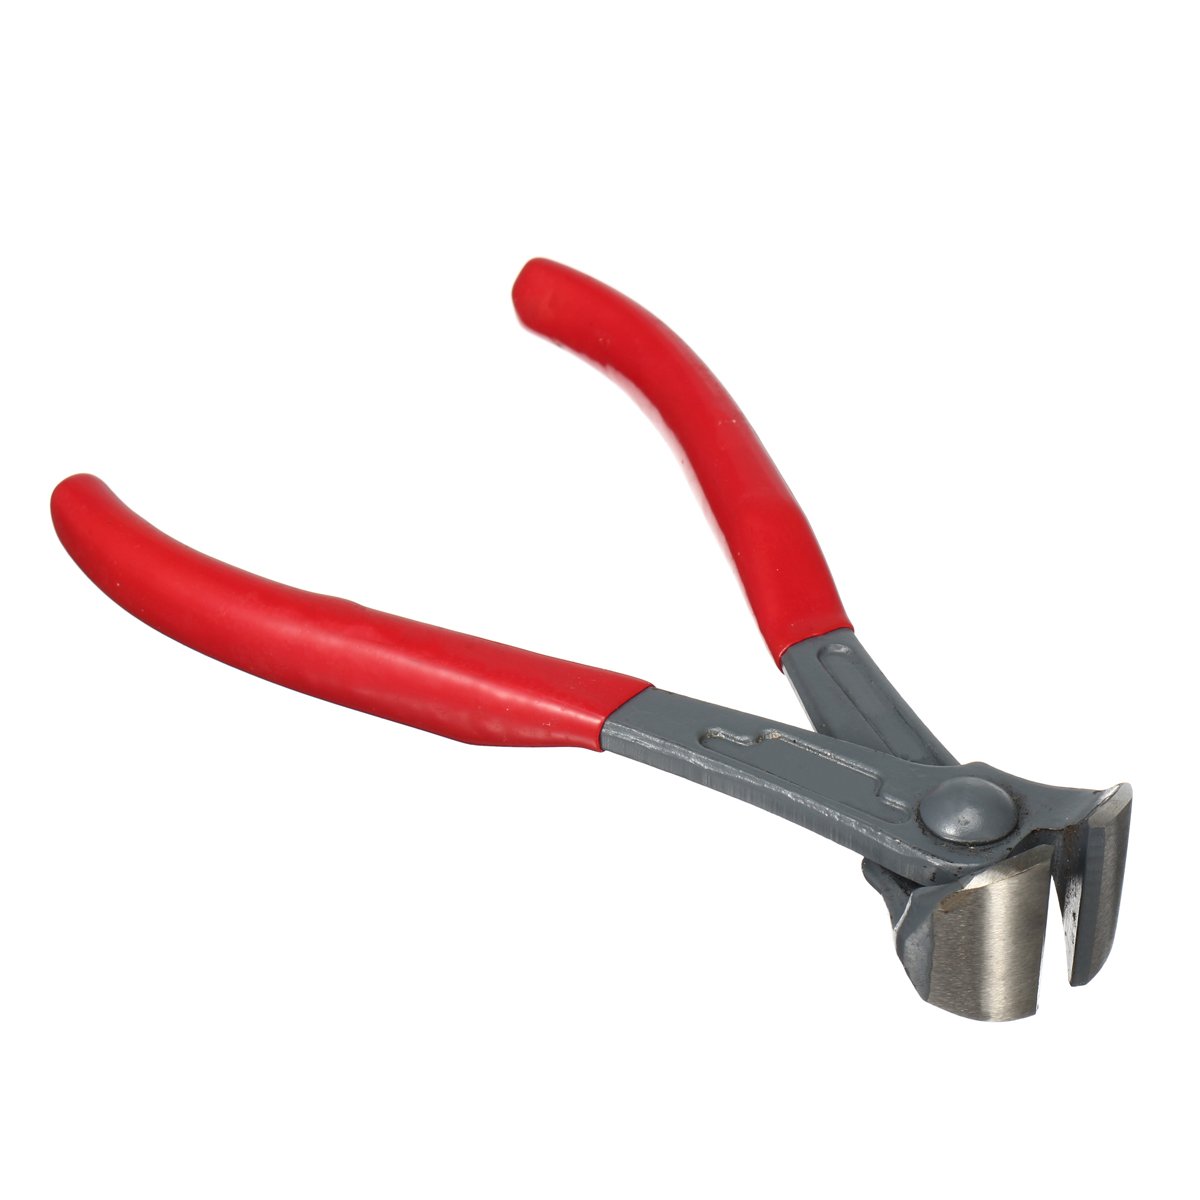 6-Inch-Steel-Fixers-End-Nippers-Cutting-Cutter-Wire-Pliers-TPR-Grip-Hand-Tool-1574164